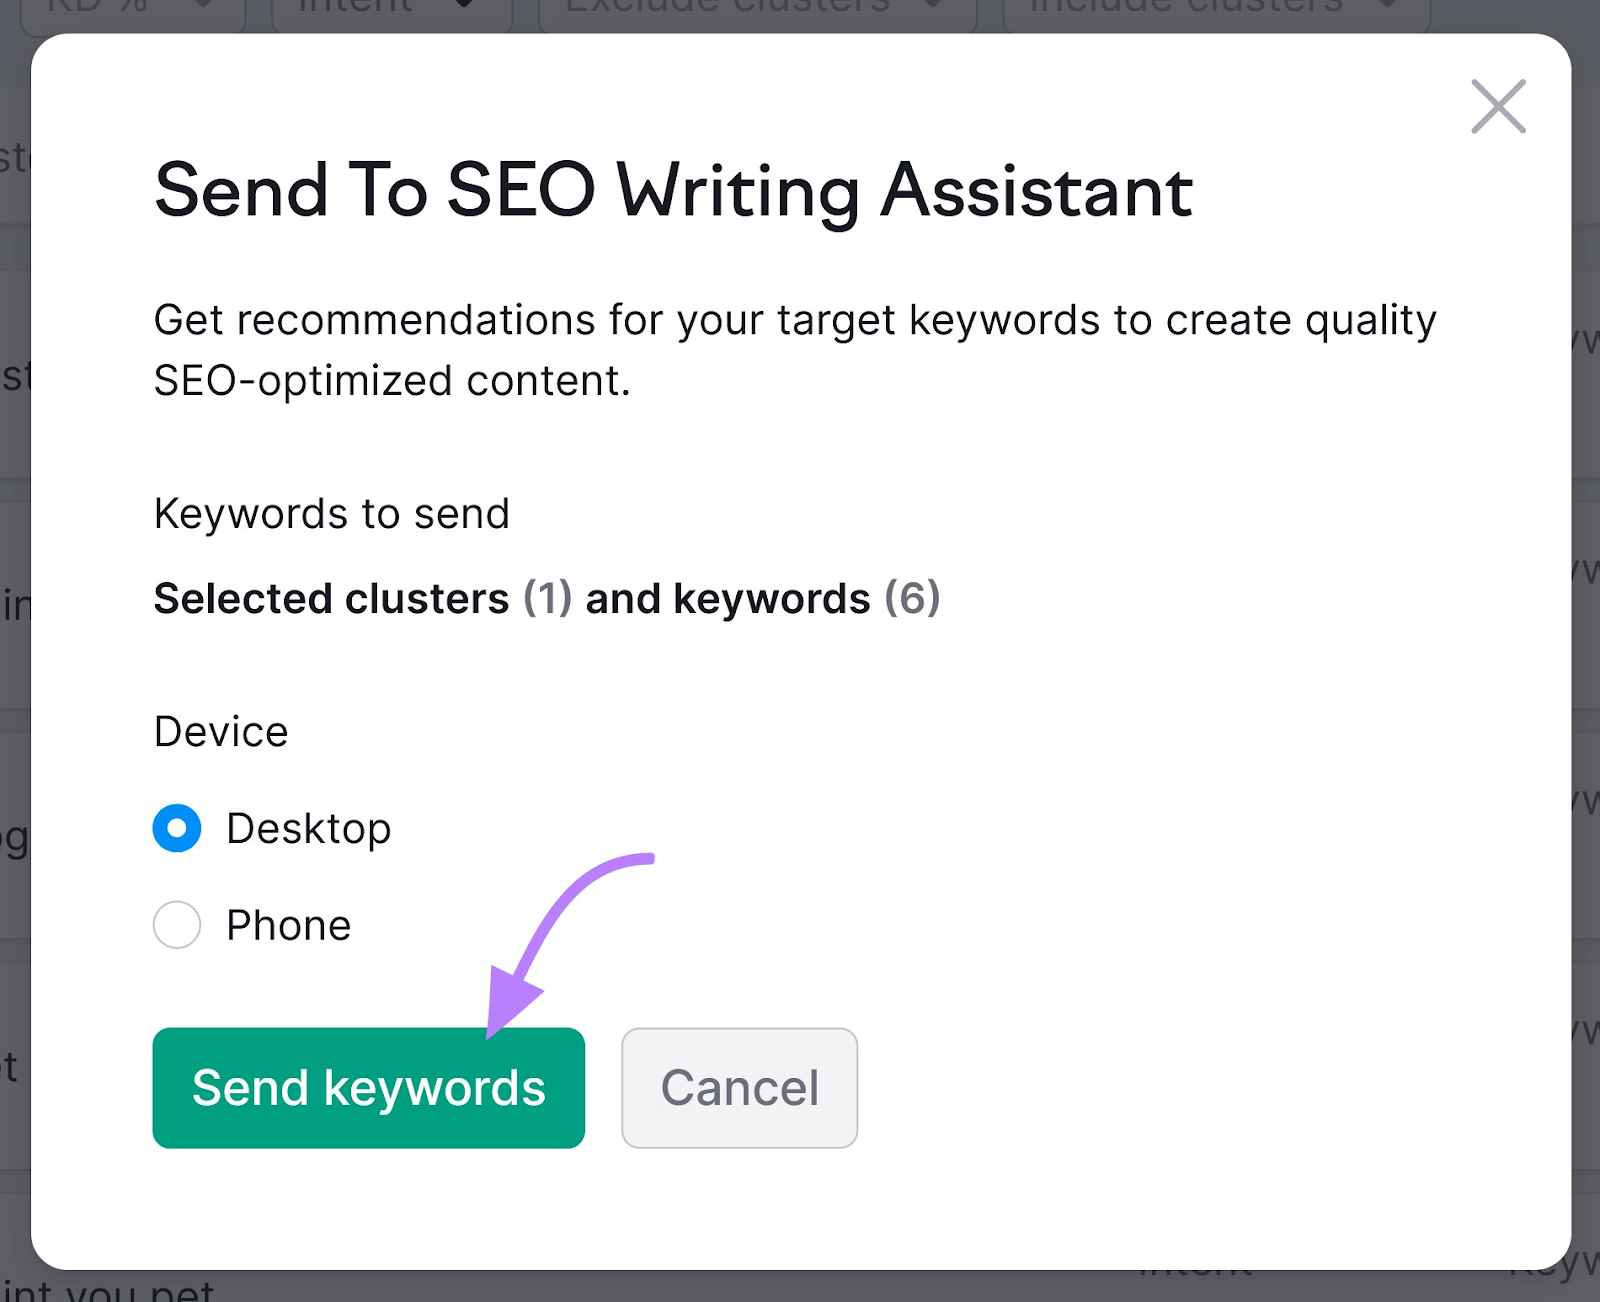 Send To SEO Writing Assistant” box